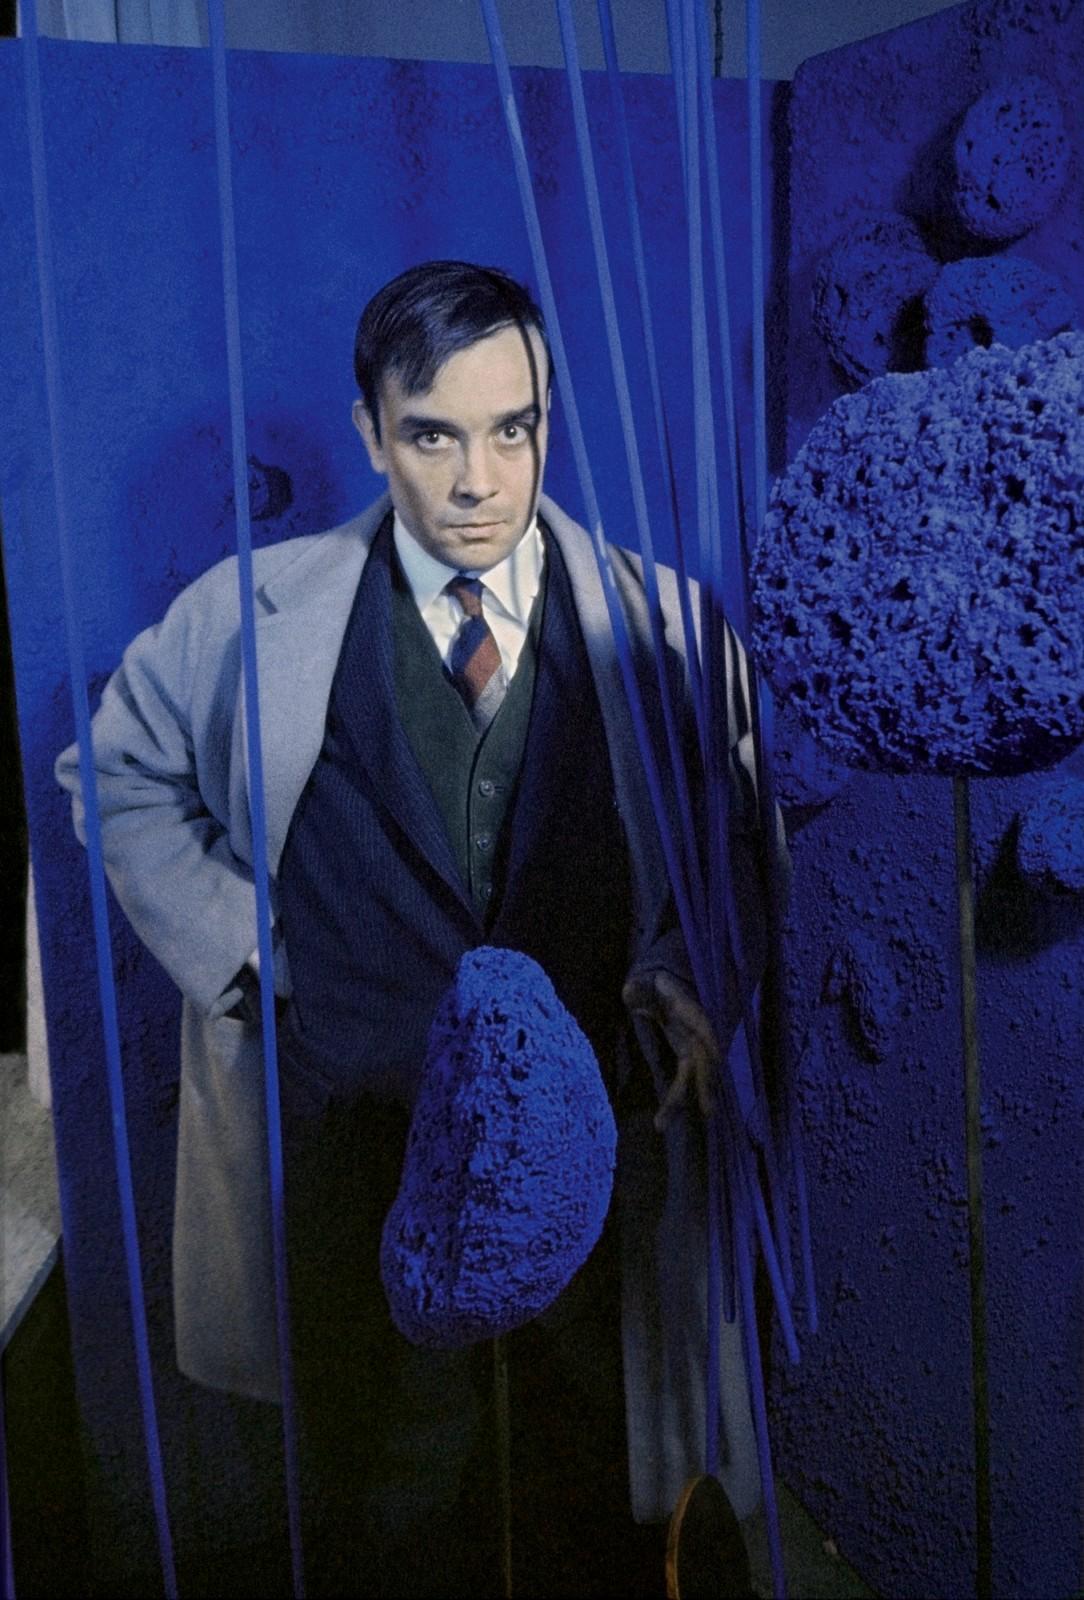 Yves Klein surrounded by Sponge Sculptures during the exhibition "Monochrome und Feuer", Museum Haus Lange